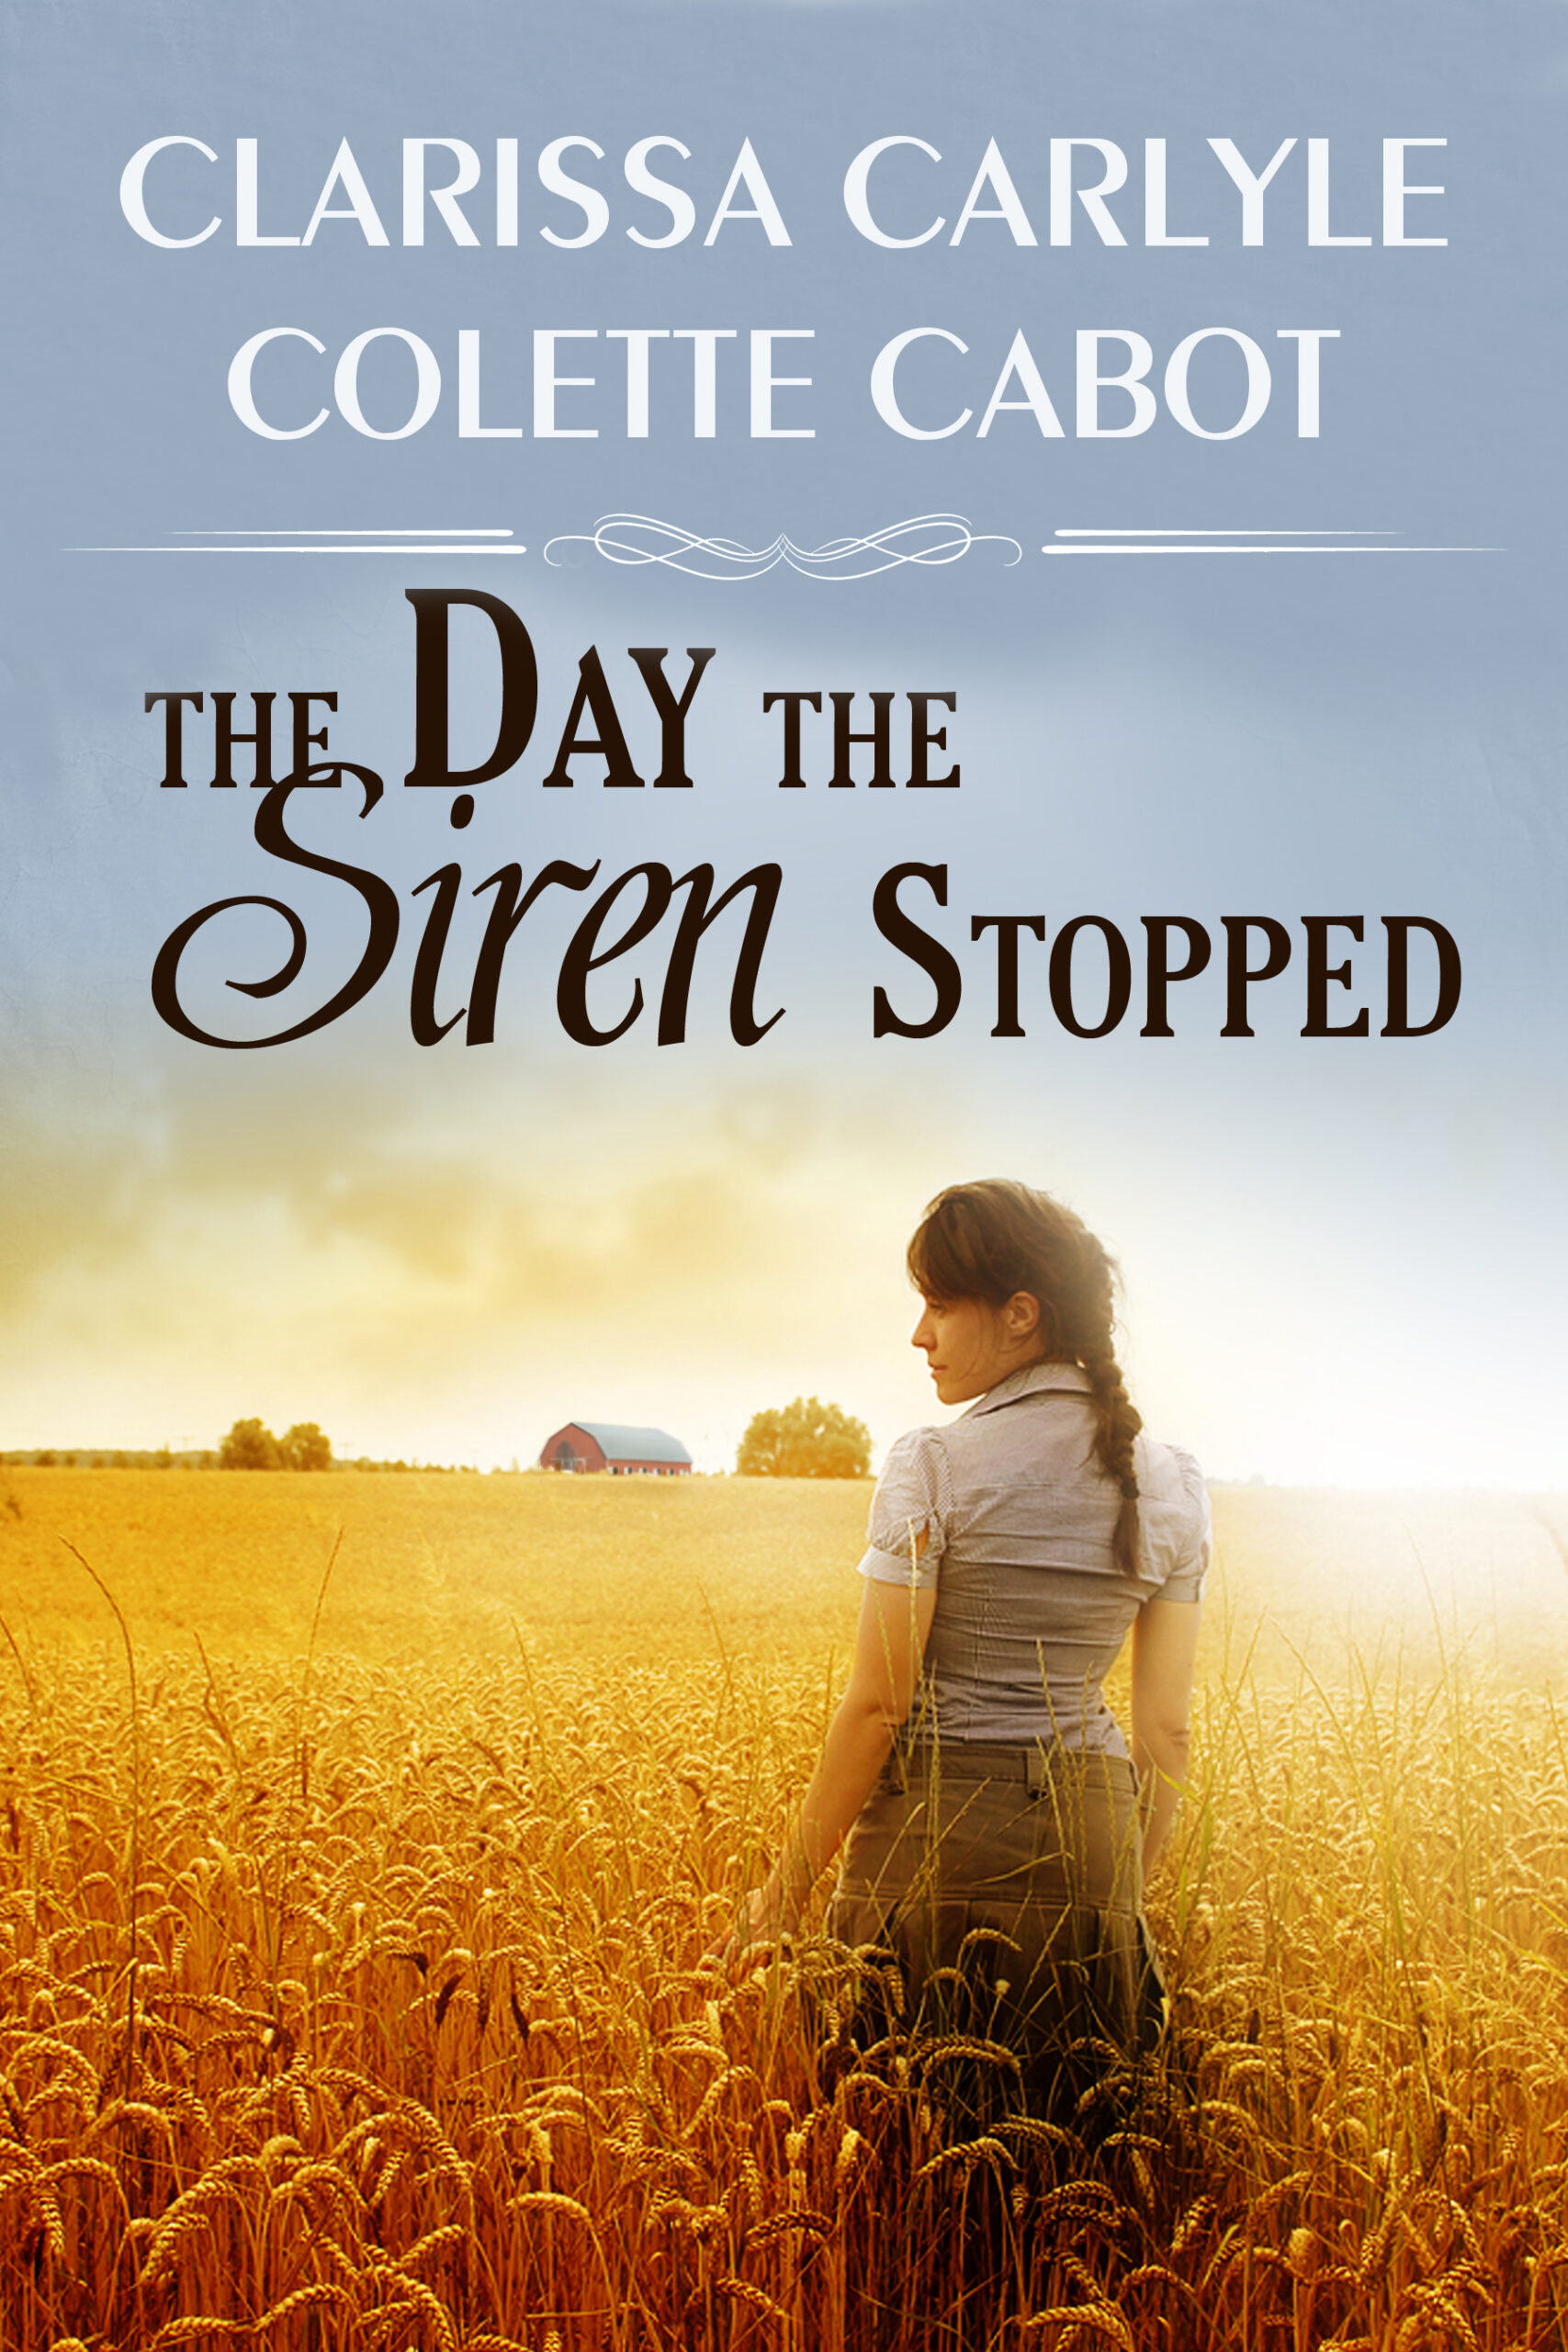 The Day The Siren Stopped by author Clarissa Carlyle